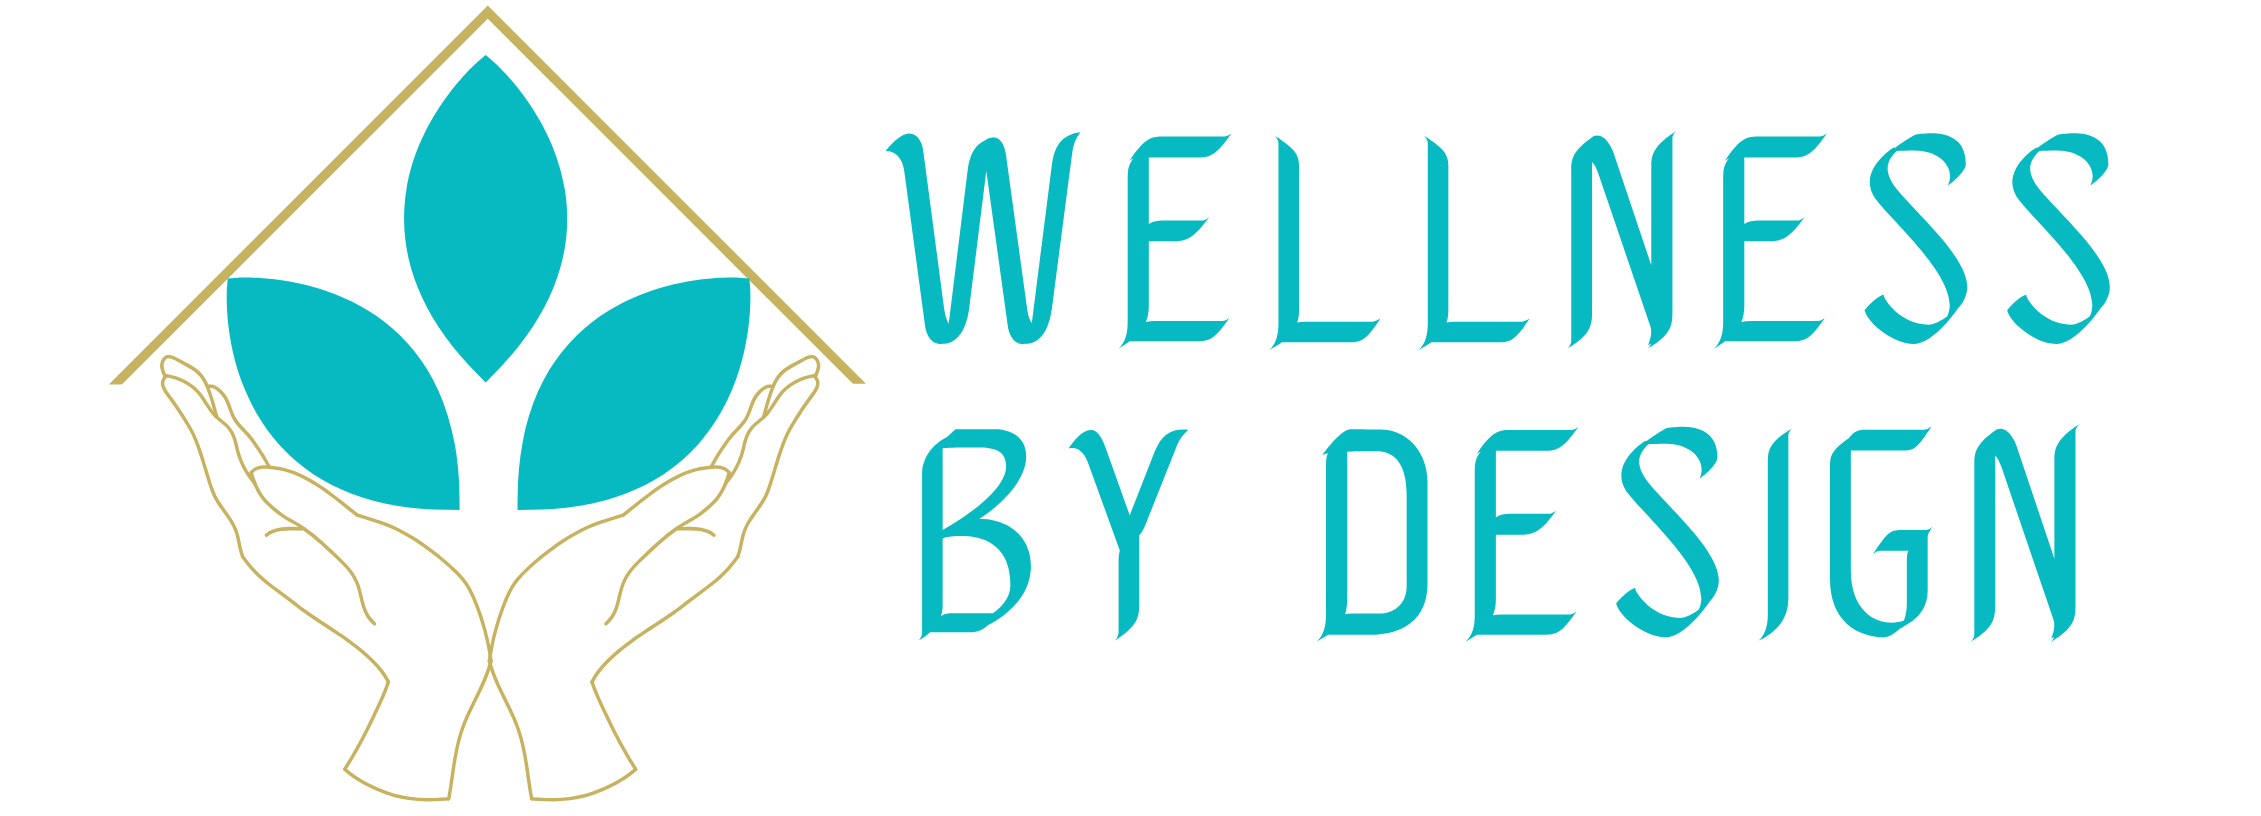 Wellness By Design Is A Concept That Seeks To Introduce Wellness In Design & Build Solutions